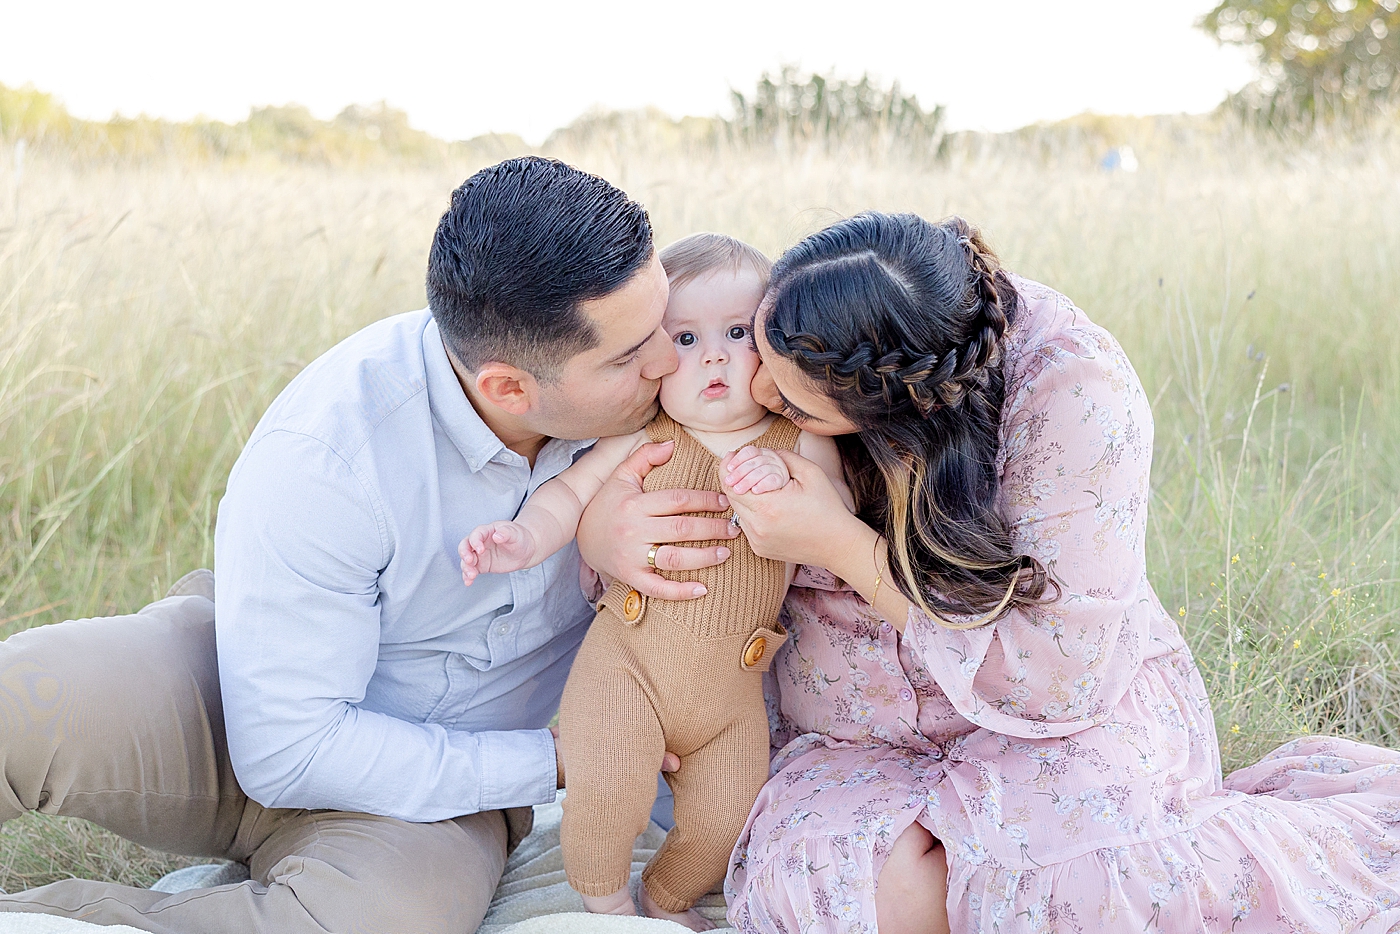 Mom and dad kissing their baby boy's cheeks during Six Month Milestone Session | Image by Sana Ahmed Photography